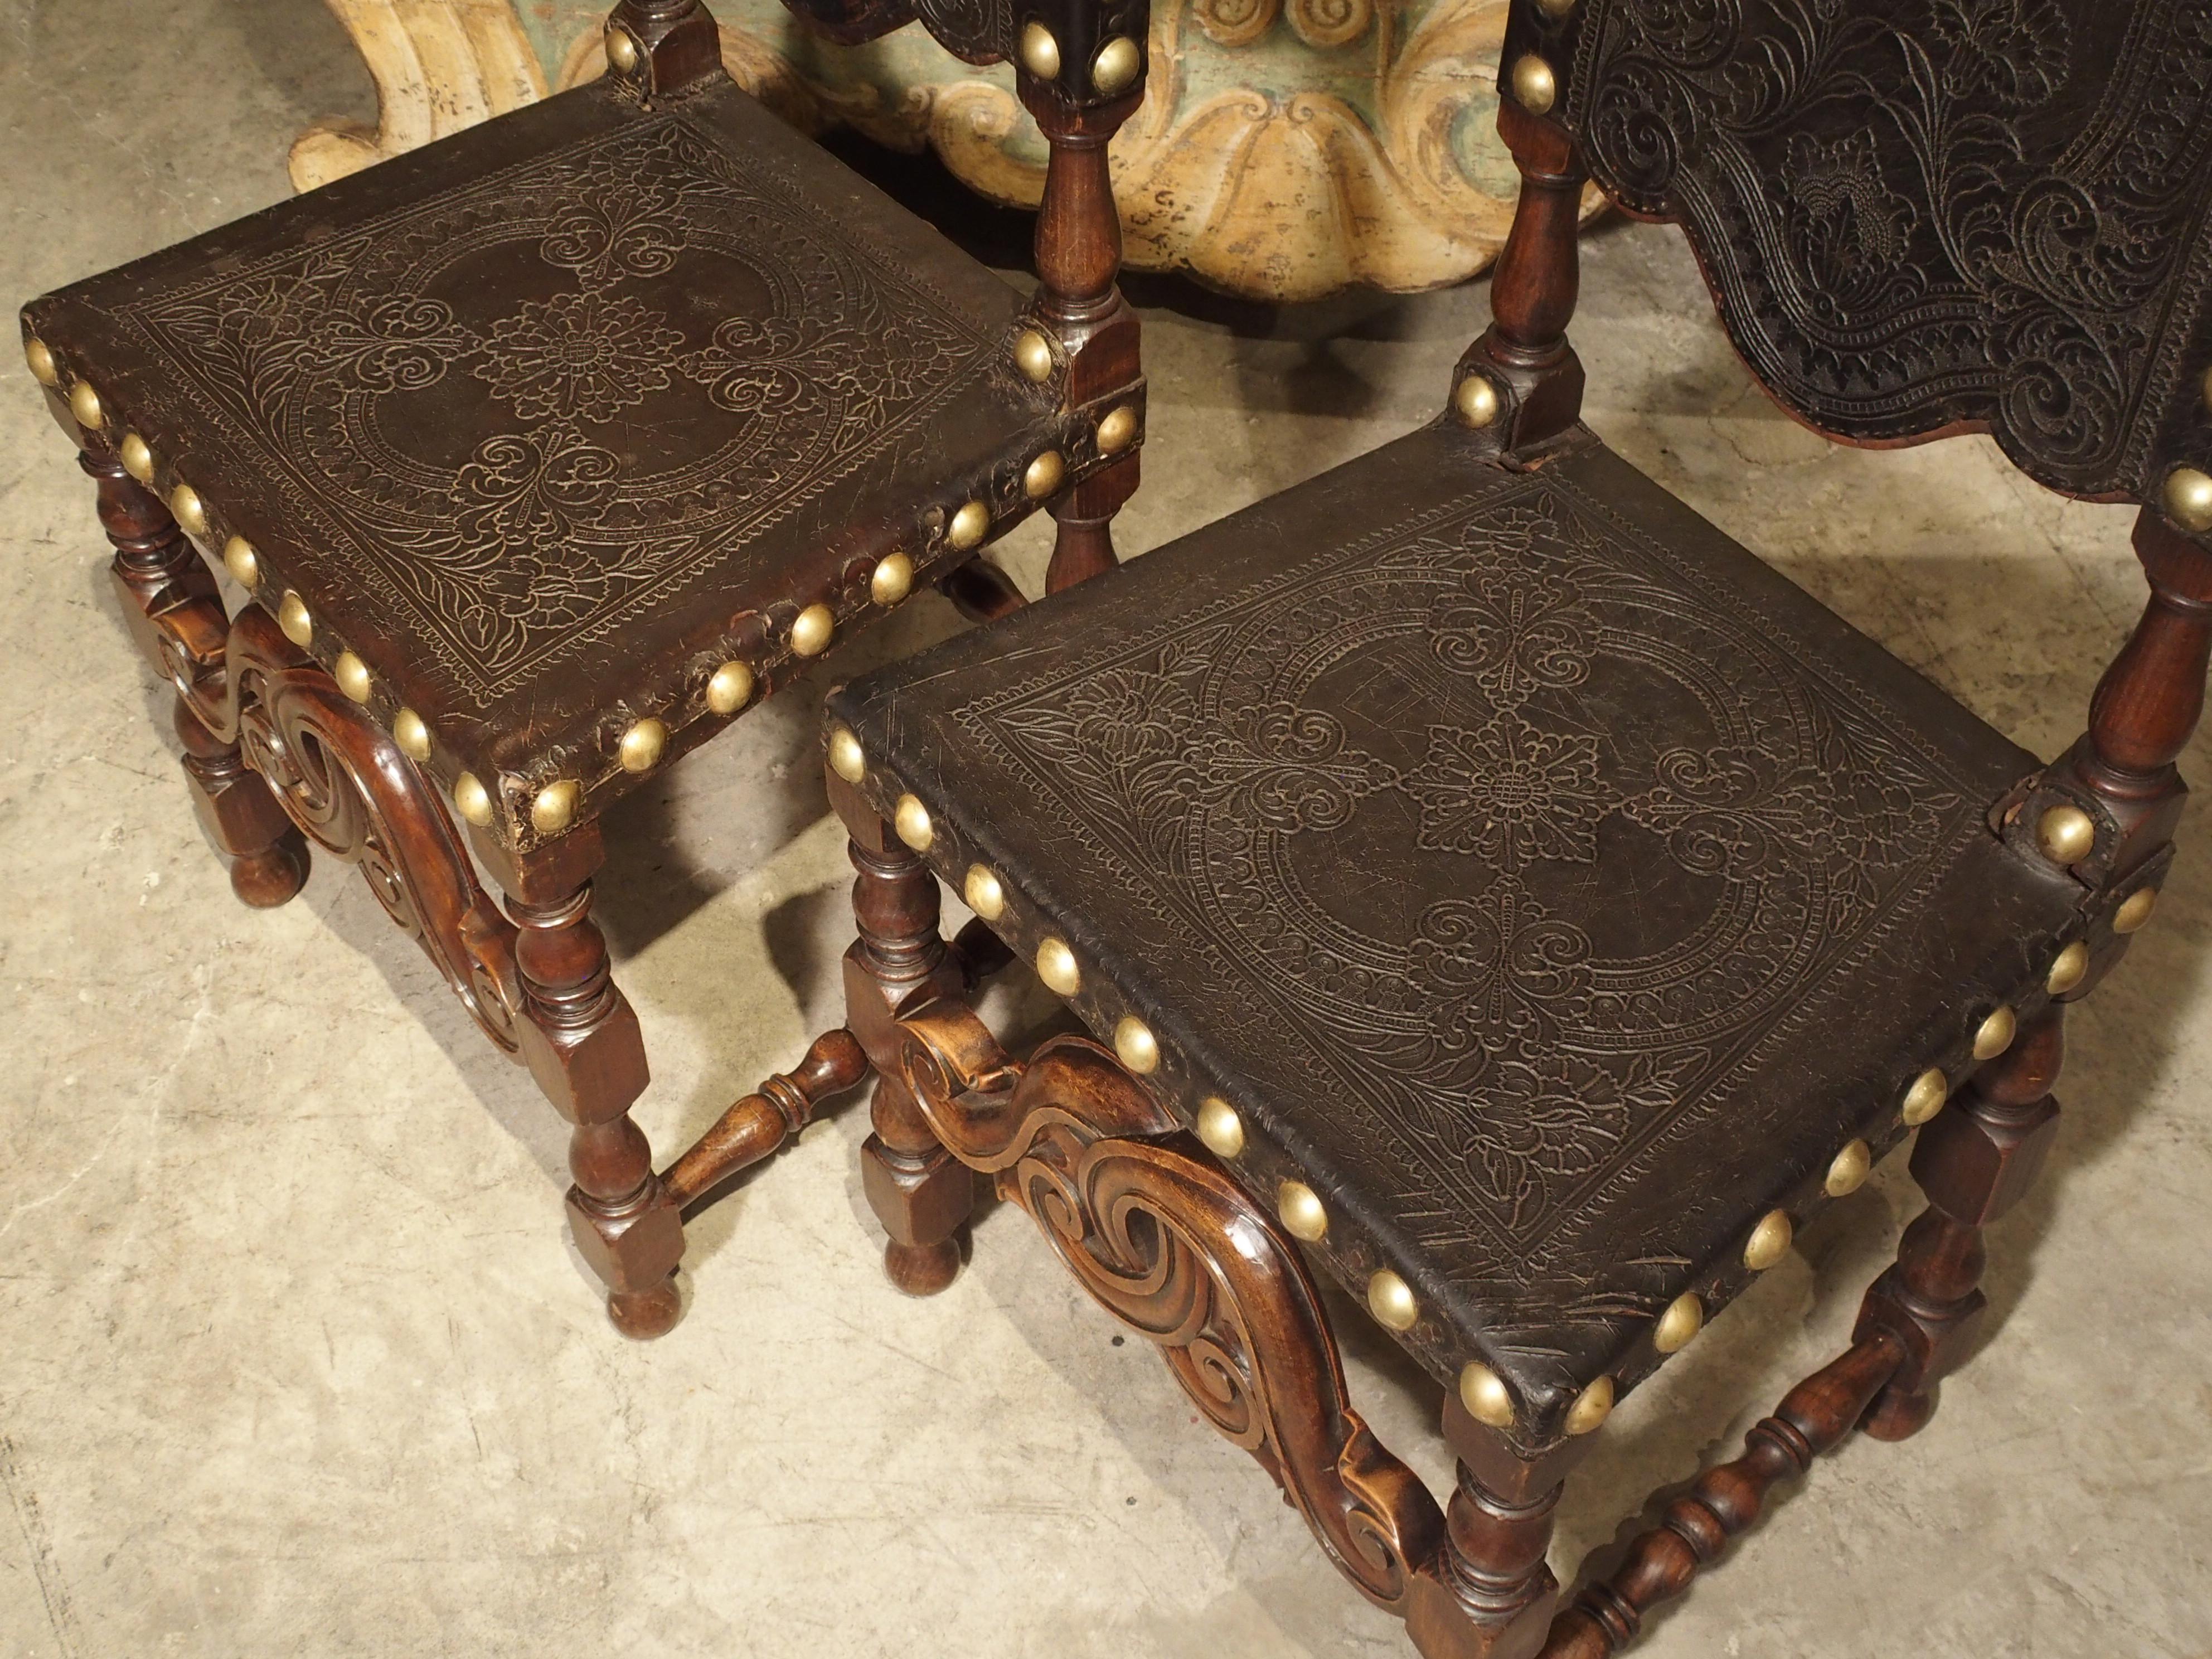 These rich antique Portuguese chairs have highly detailed leather backs and seats. The leather is attached to the carved wood frames by large brass nailheads, and the motifs on the leather include flowers, leaves, scrolls, and large central